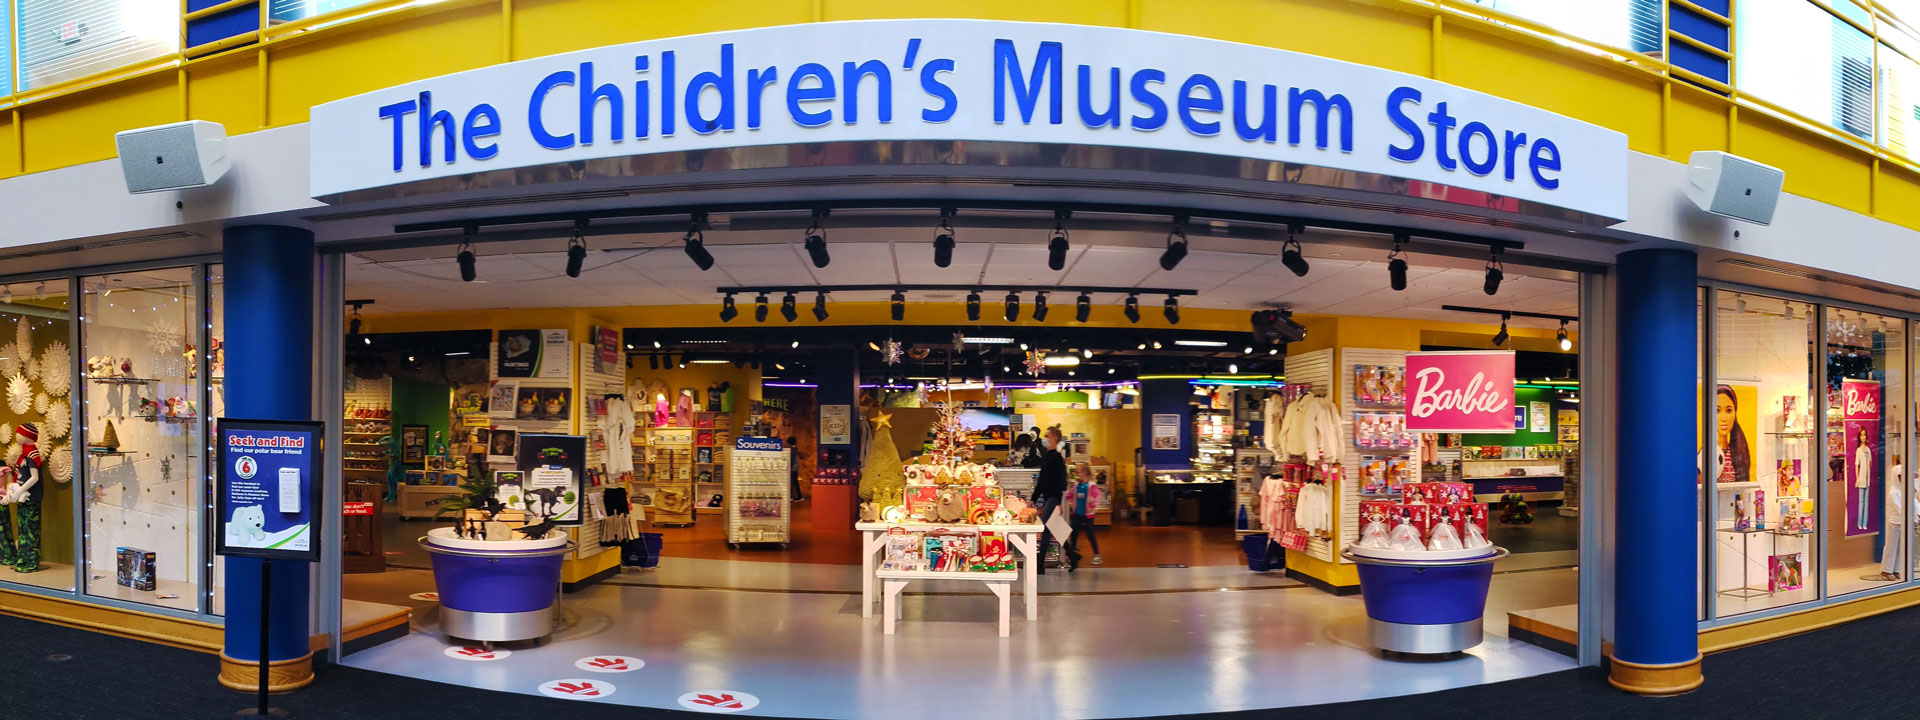 Main entrance to The Children's Museum Store